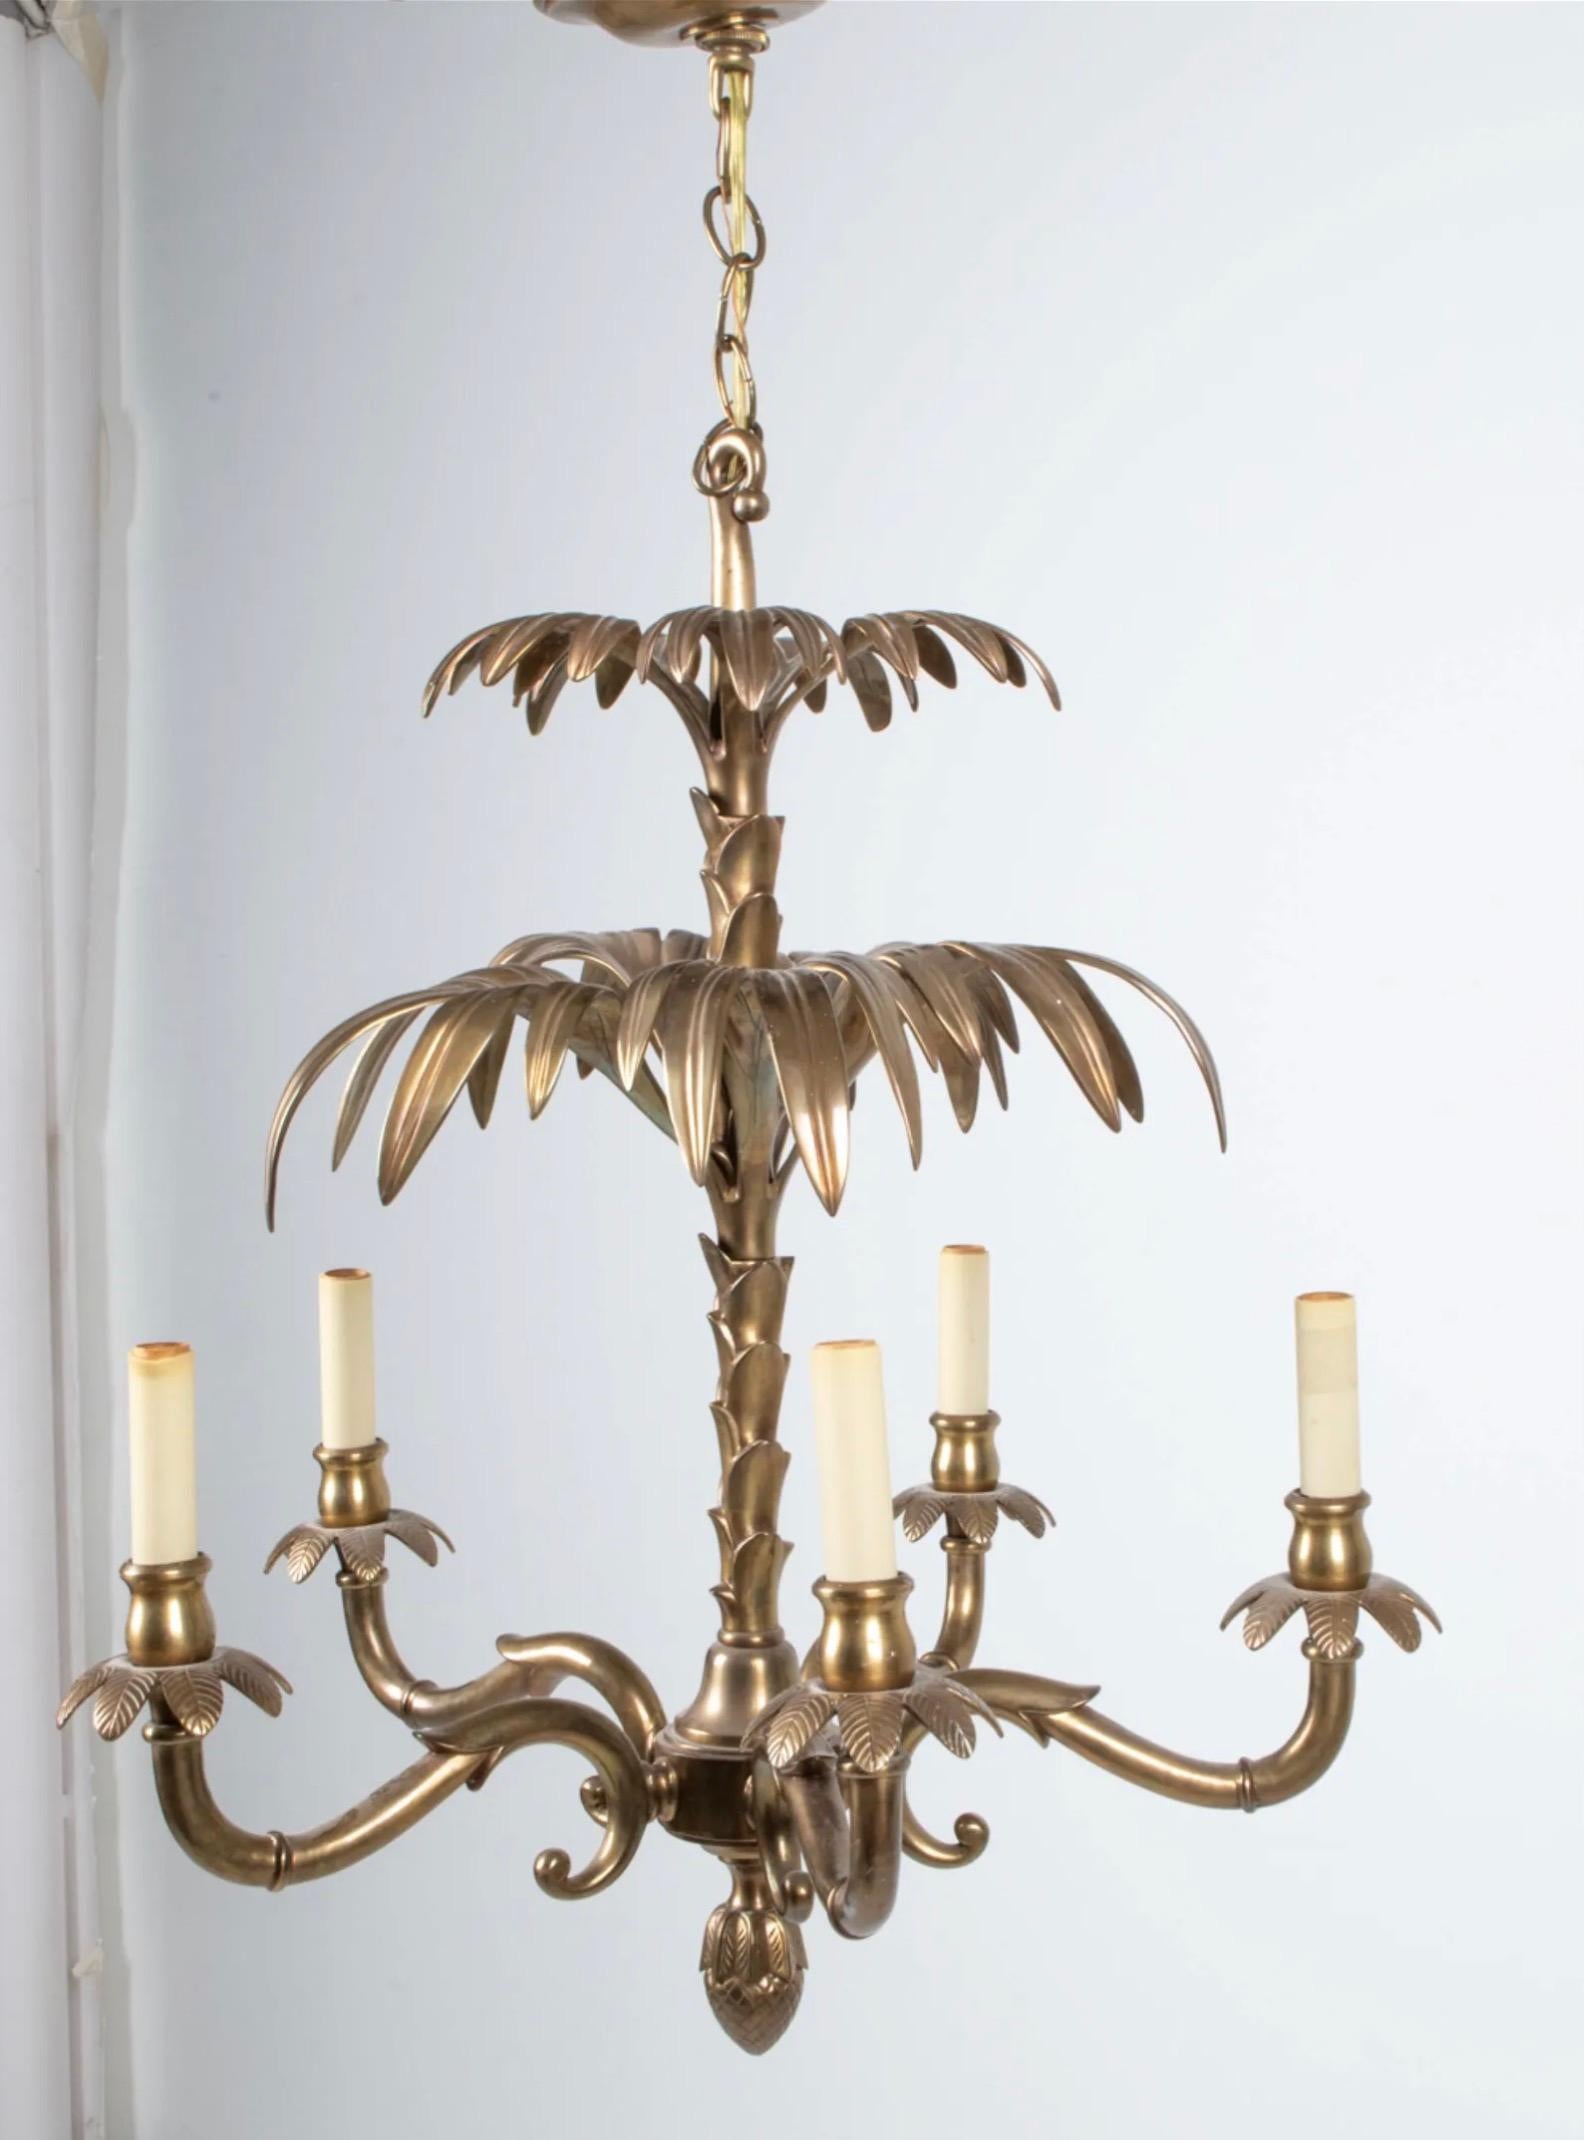 Gorgeous Hollywood Regency revival chandelier in solid brass, labeled Chapman with 1988 copyright on canopy. Dimensions: H 26